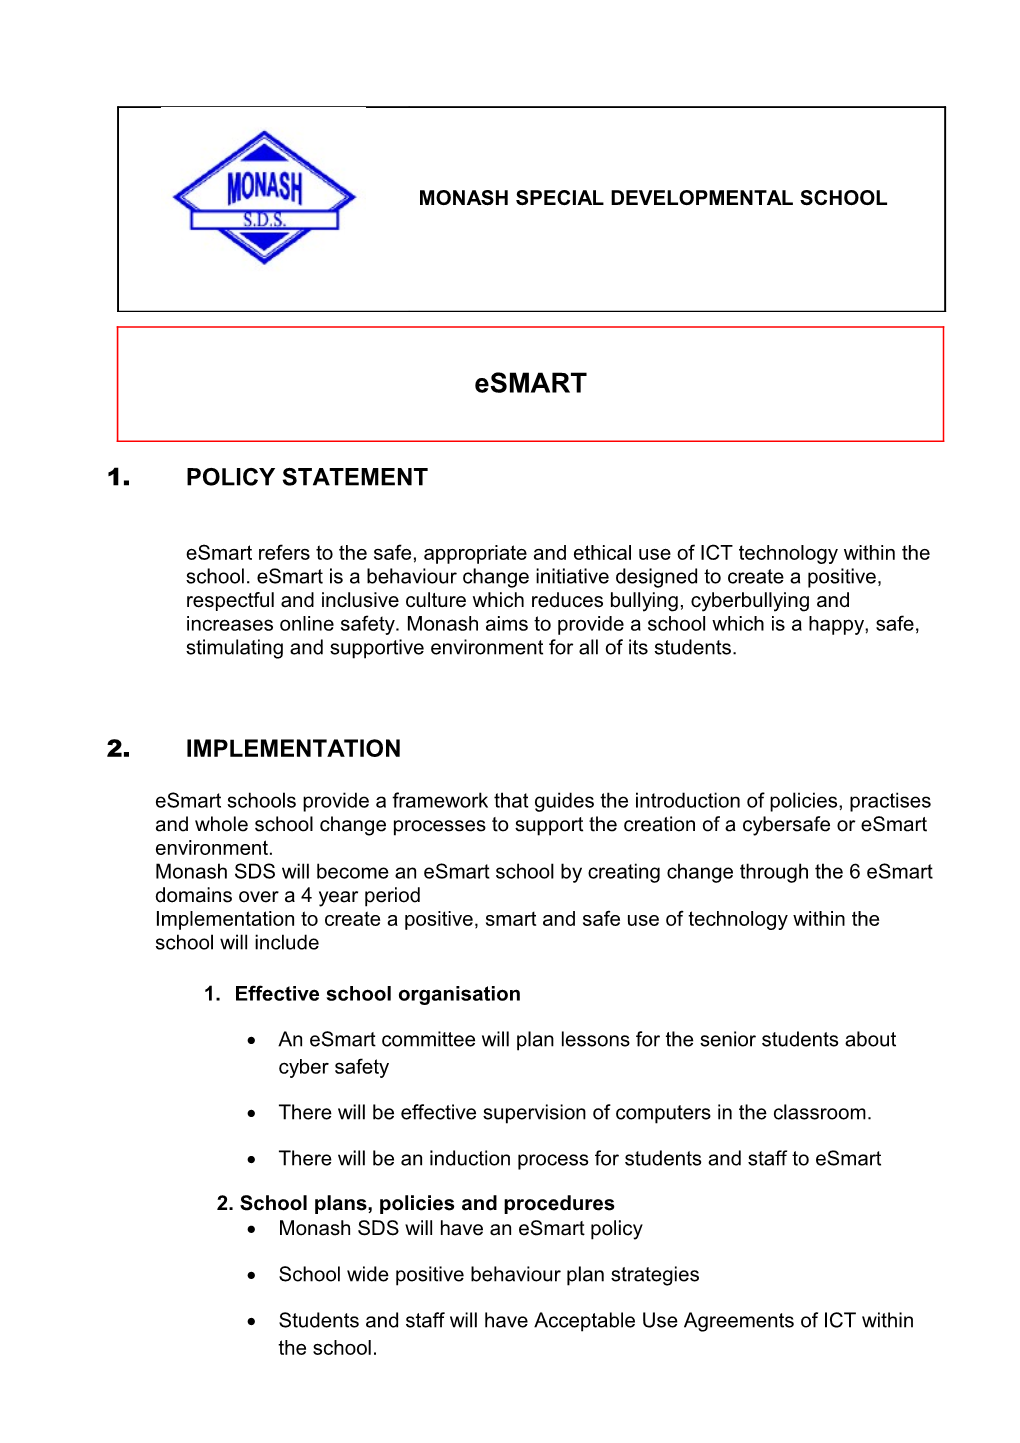 1. Policy Statement s2